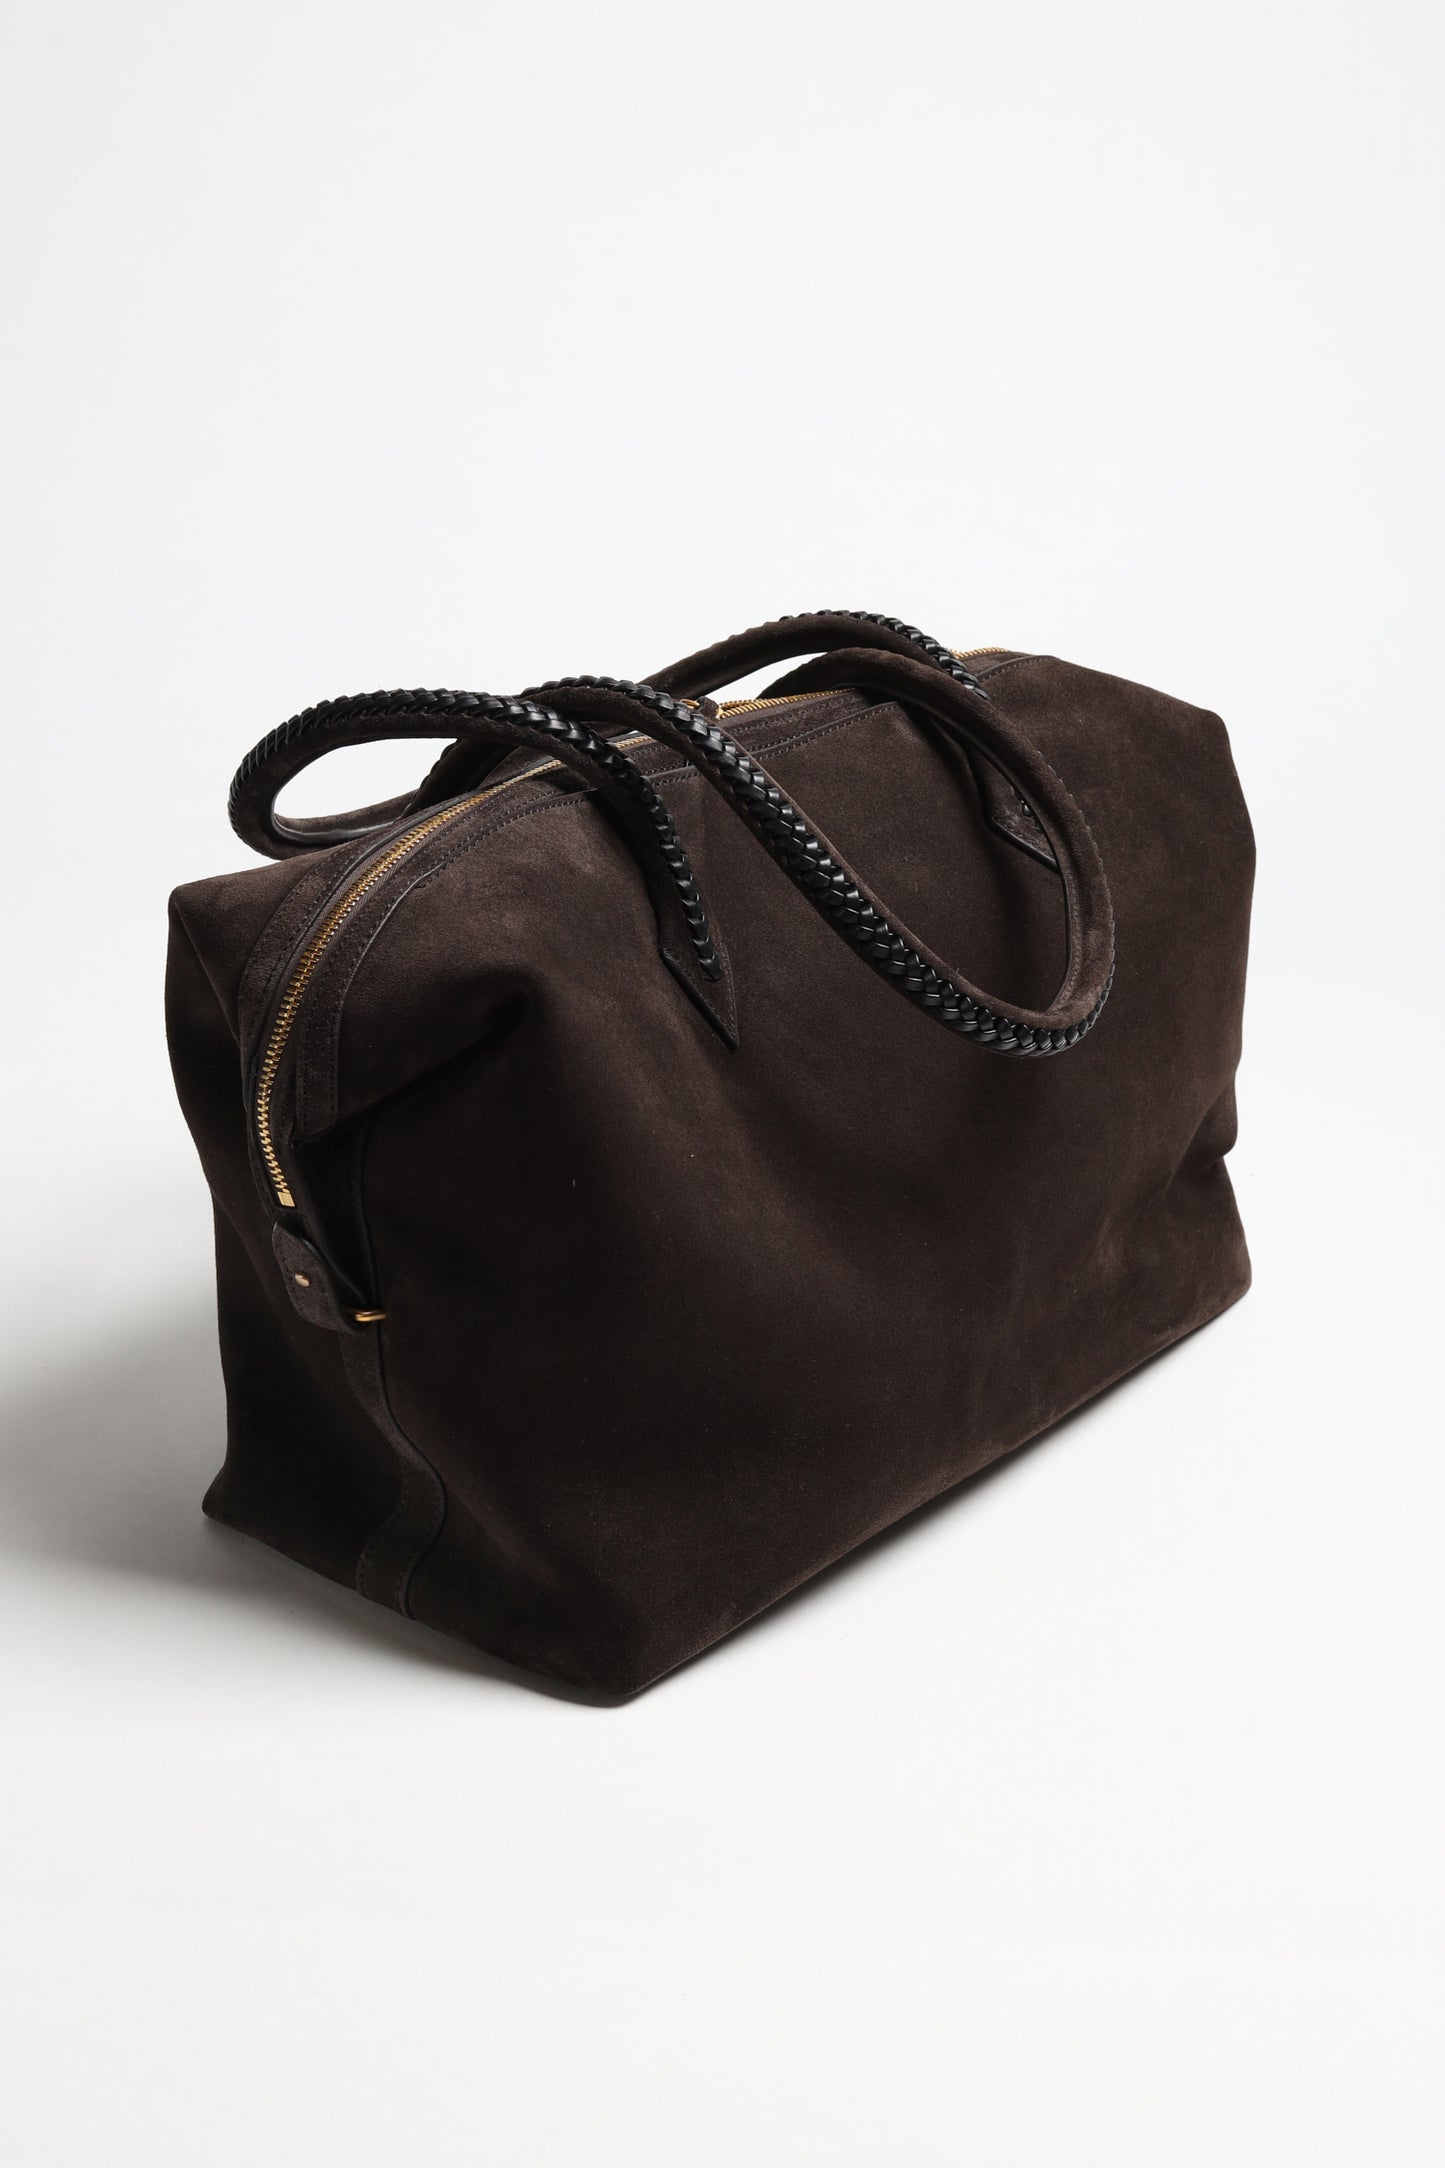 Tasche Perriand All Day in Chocolate/SchwarzMétier - Anita Hass